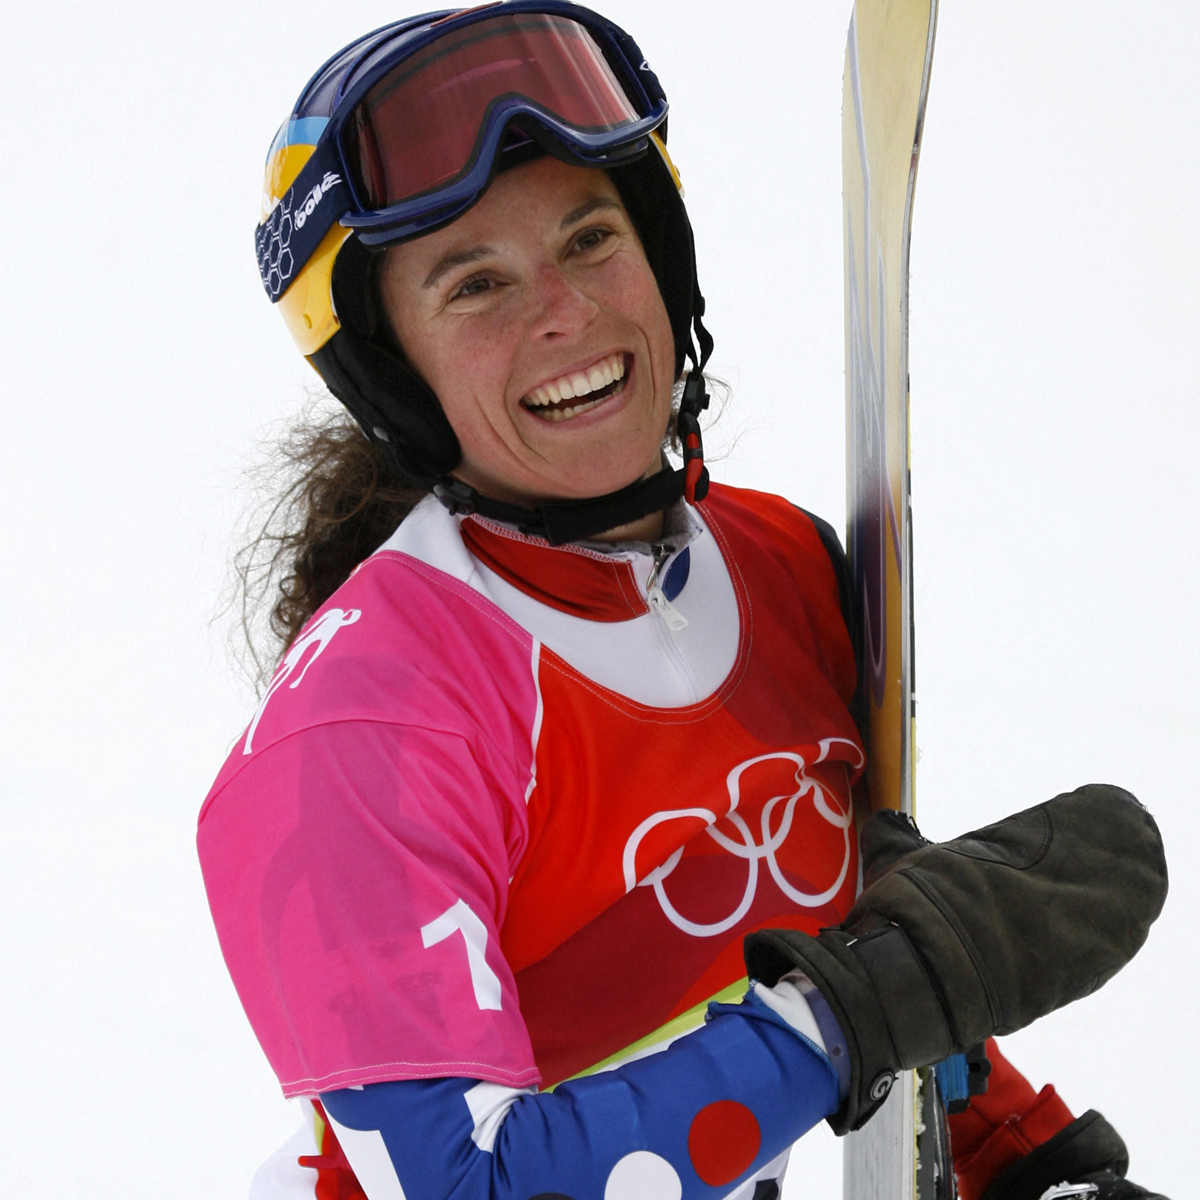 Olympic snowboarder Julie Pomagalski dies in avalanche at 40